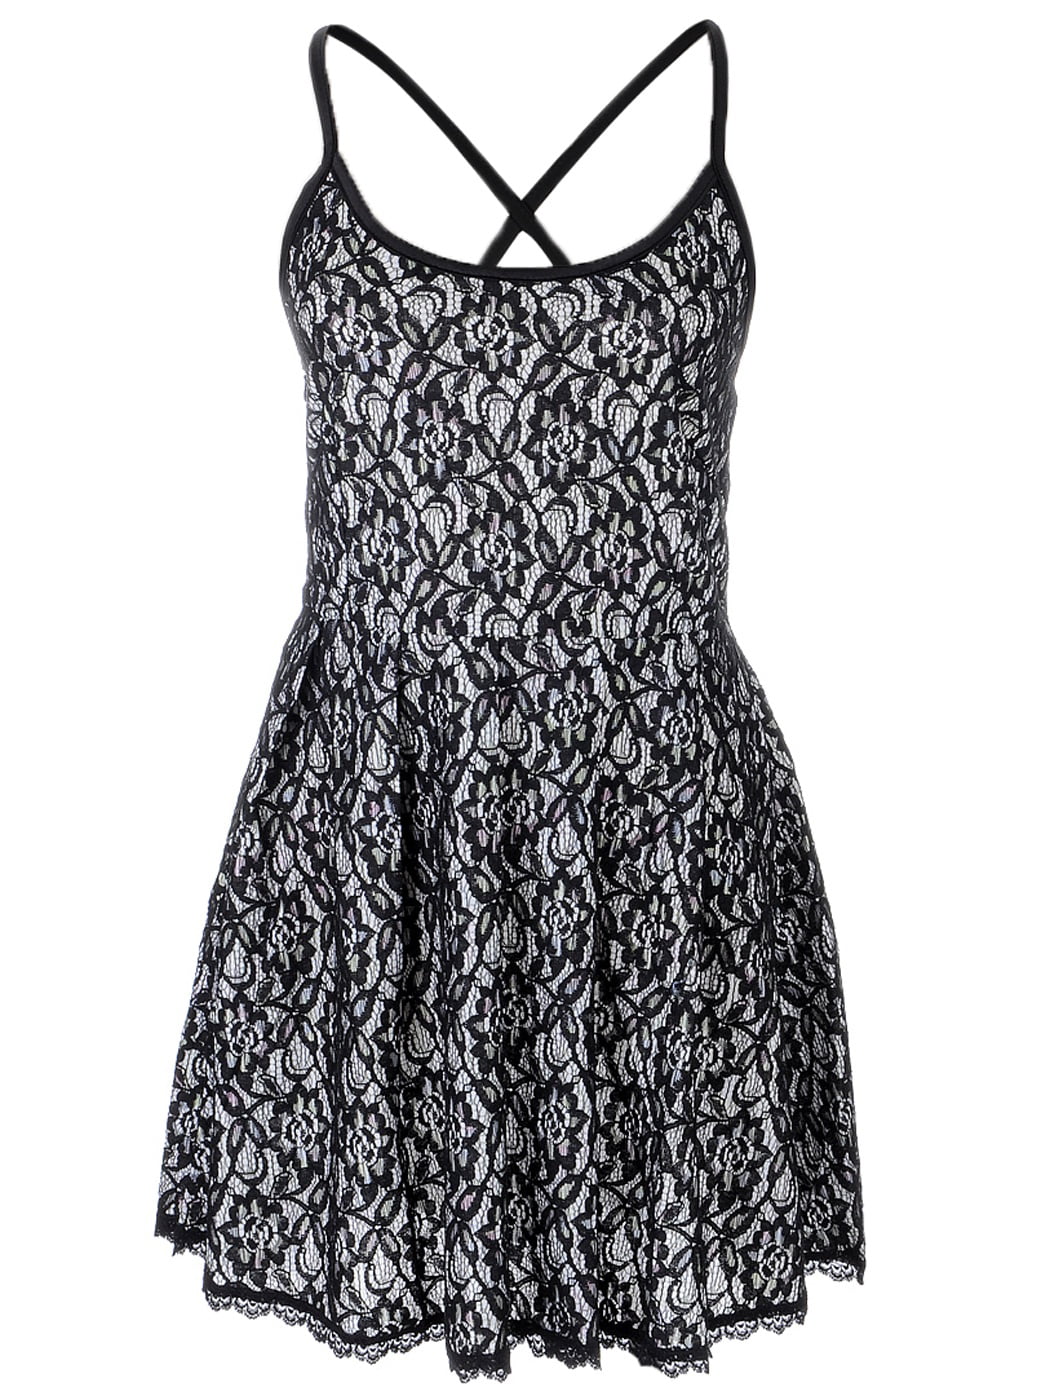 S/M Fit Black White All Over Lace Cross Back Bow Noodle Strap Dress ...